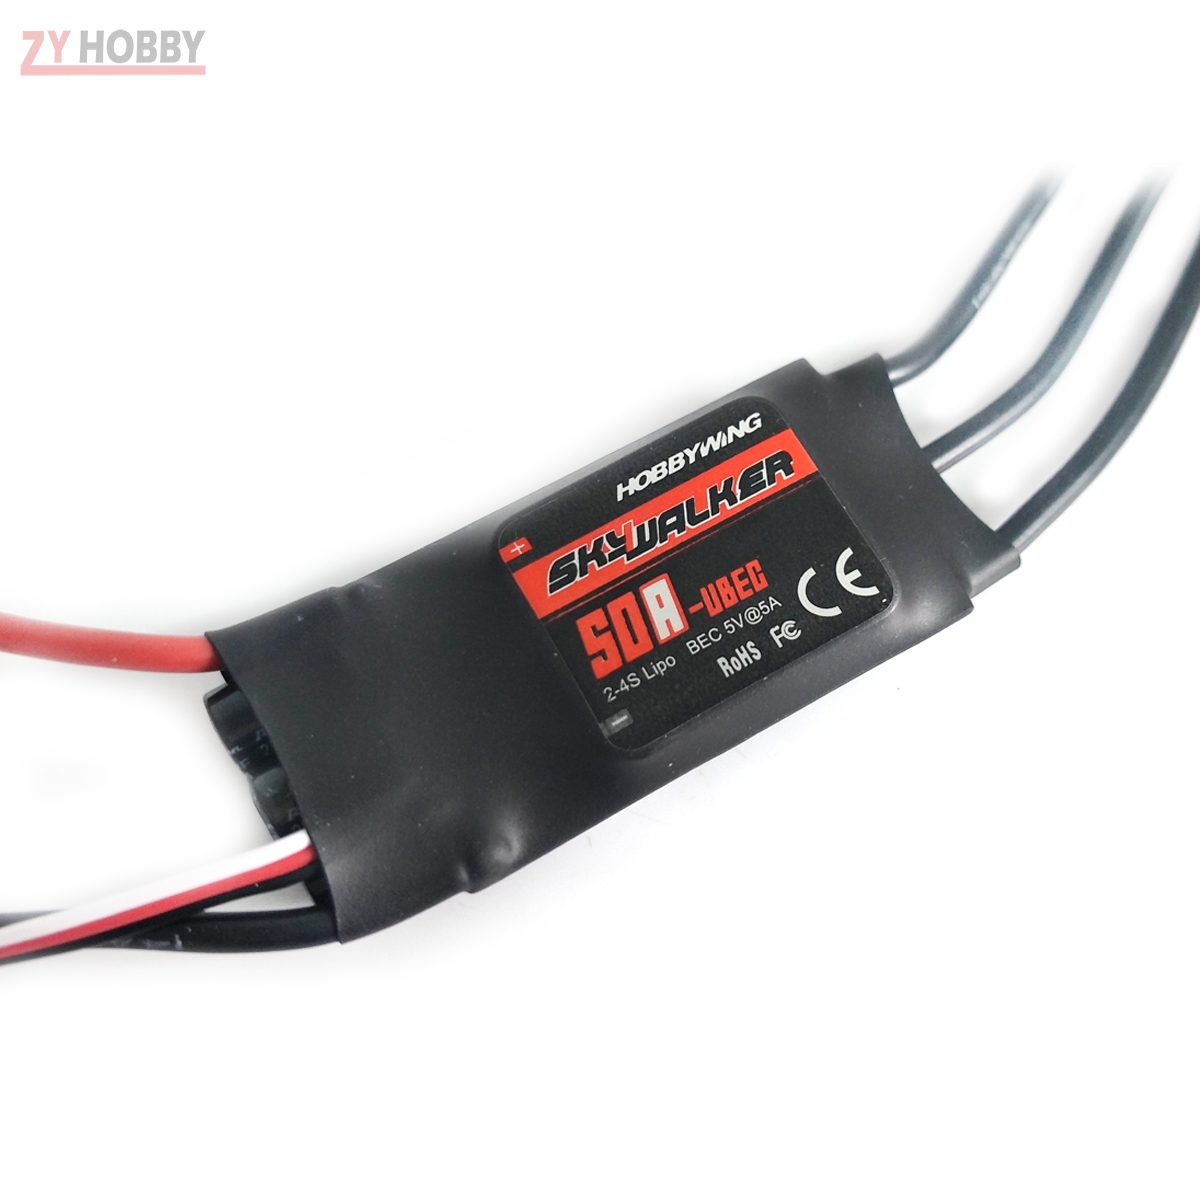 Hobbywing SkyWalker-50A 2-4S UBEC Electric Speed Control ESC 440/450 Helicopter 